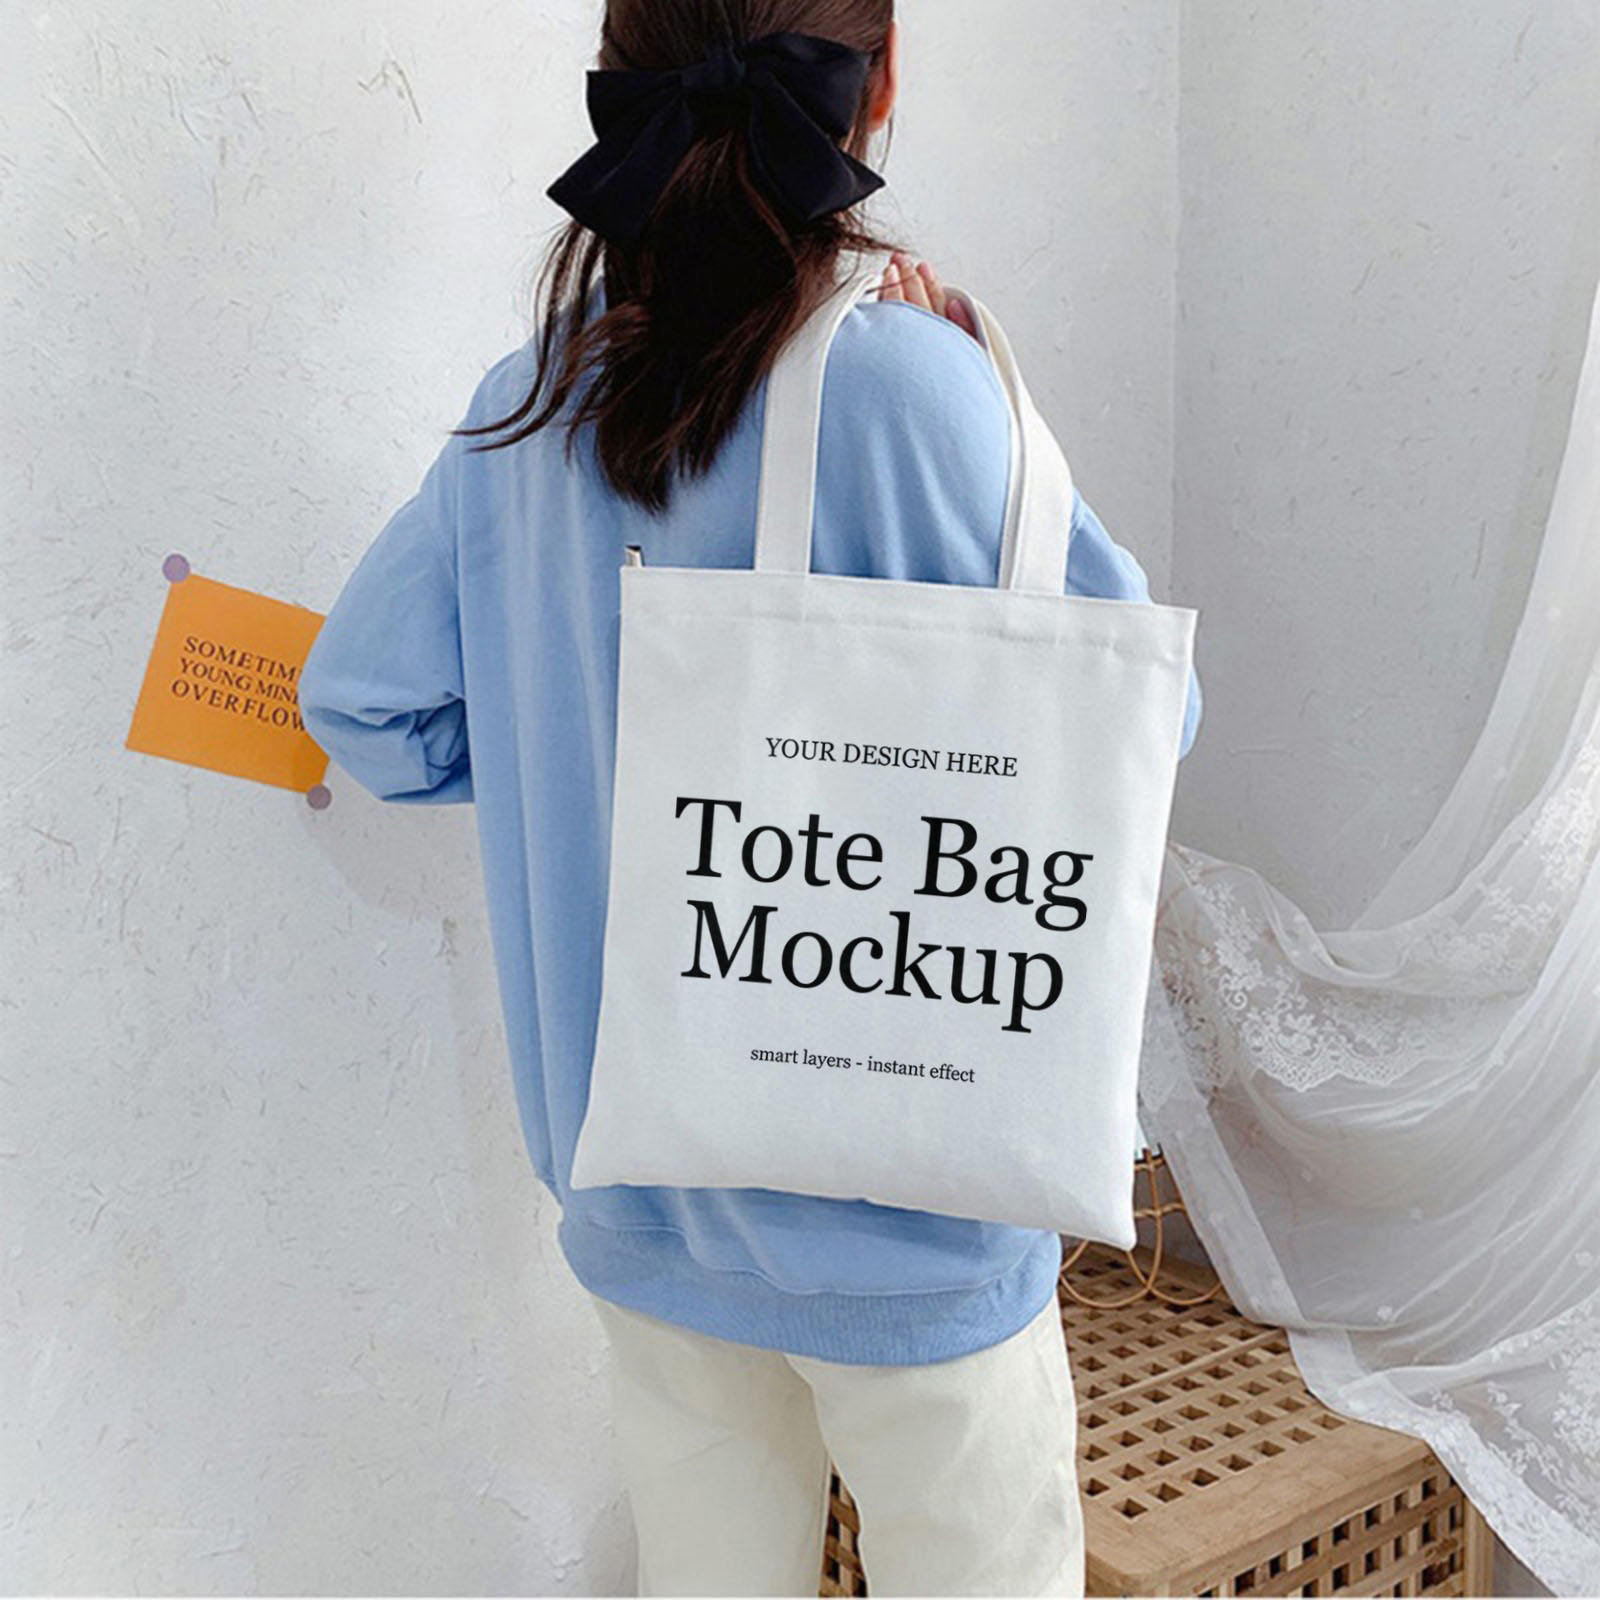 Free PSD White Canvas Tote Bag Mockup Download 69 by diosvolt on DeviantArt